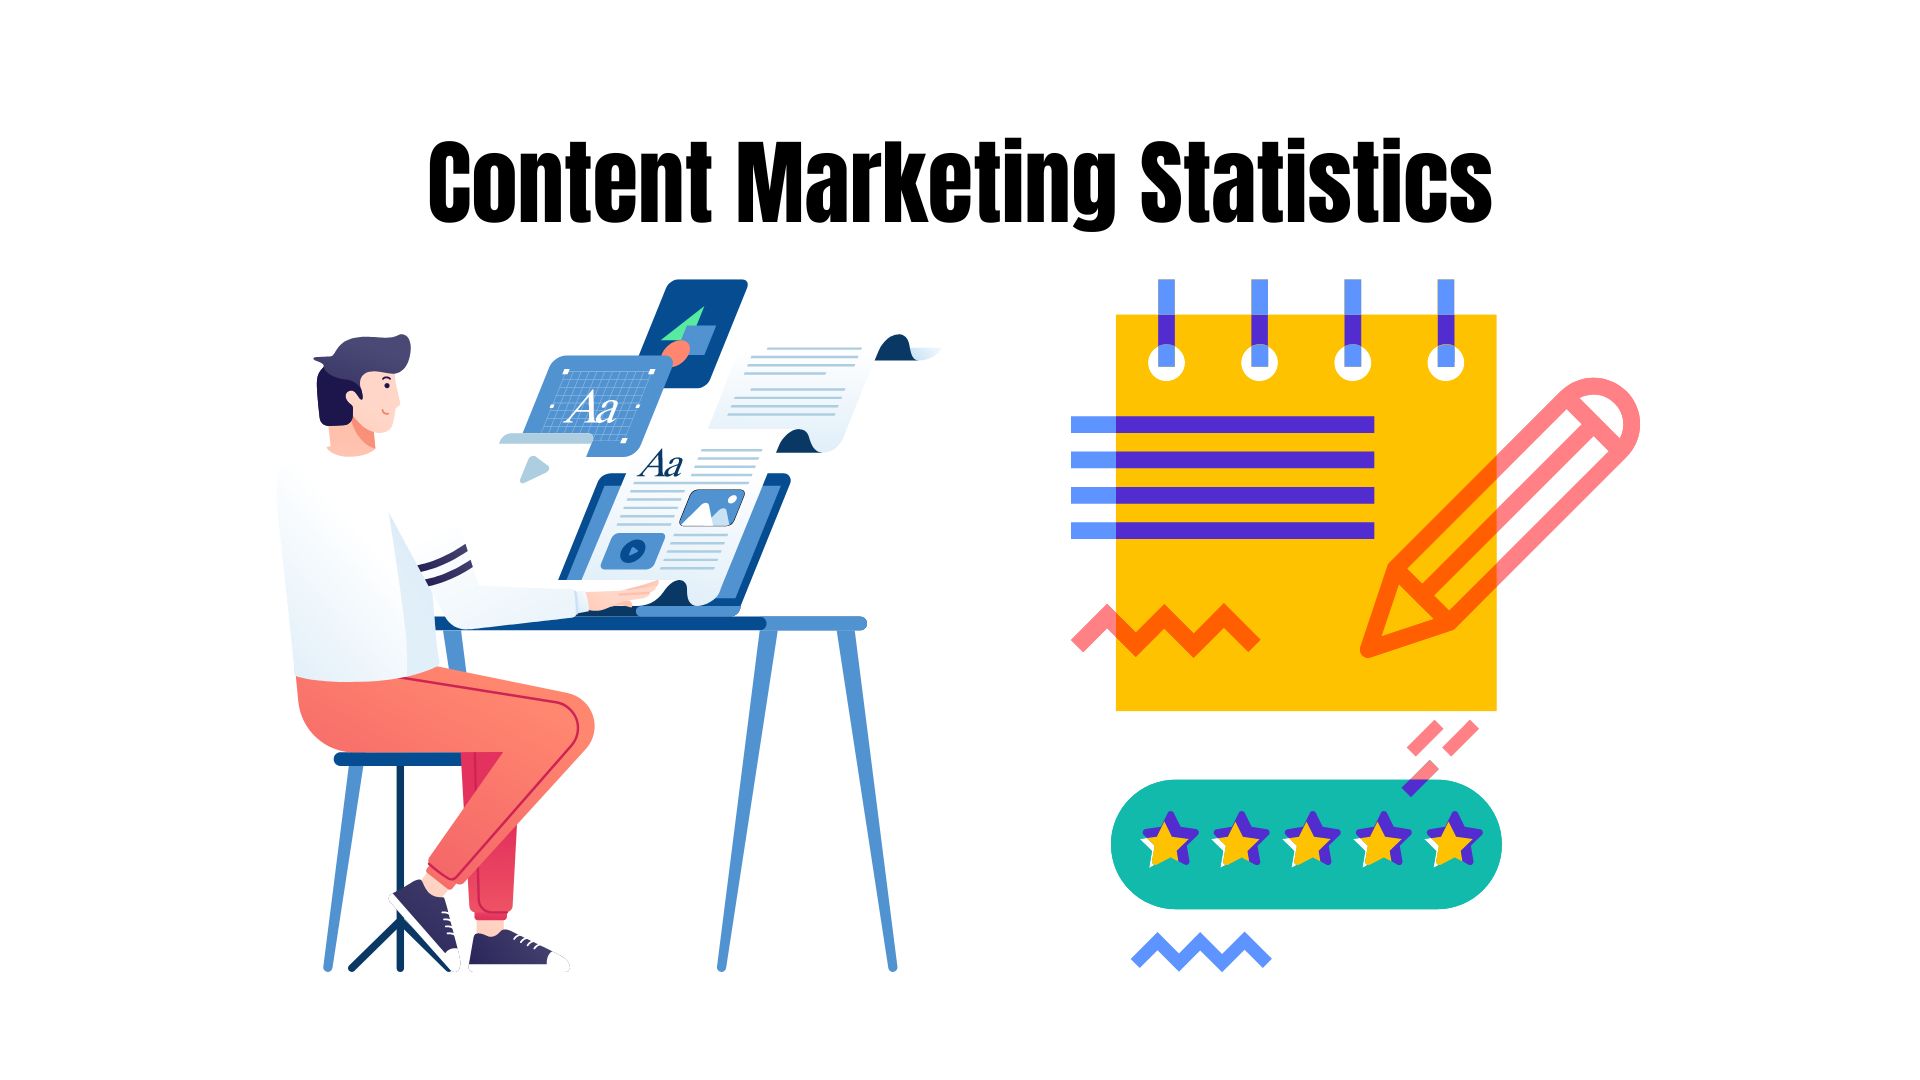 Content Marketing Statistics 2023 Trends, Facts, Market Size and Revenue